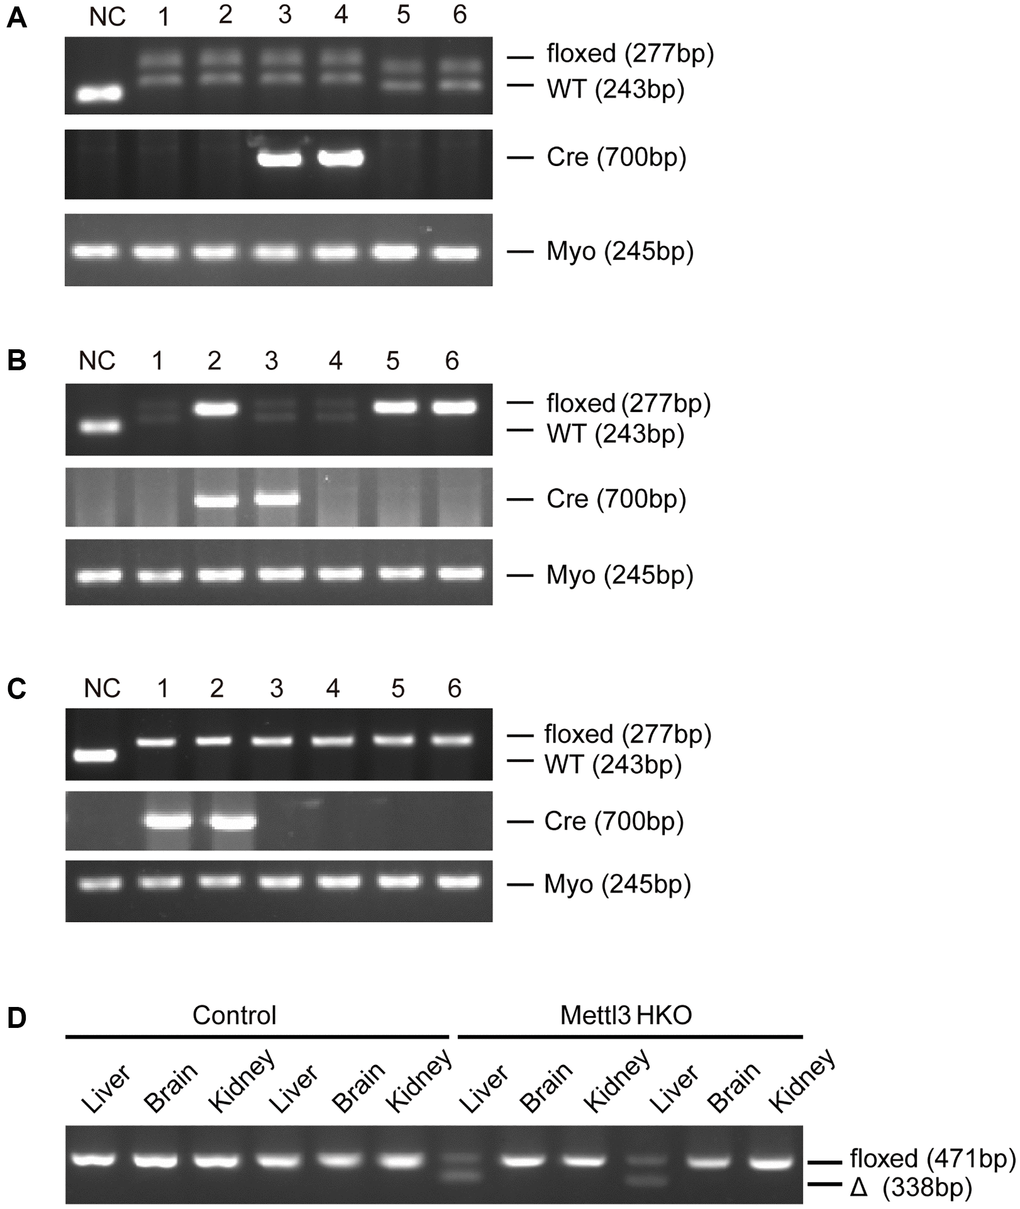 Generation of hepatocyte-specific Mettl3 knockout mice. (A) The offspring mice with different genotypes from intercrossing Mettl3flox/flox and heterozygous Alb-Cre mice. (B) The offspring mice with different genotypes from intercrossing Mettl3flox/wt; Alb-Cre and Mettl3flox/flox mice. (C) The offspring mice with different genotypes from intercrossing Mettl3flox/flox; Alb-Cre and Mettl3flox/flox mice. (D) PCR-based genotyping of genomic DNA collected from the main organs of METTL3 HKO mice and control mice.